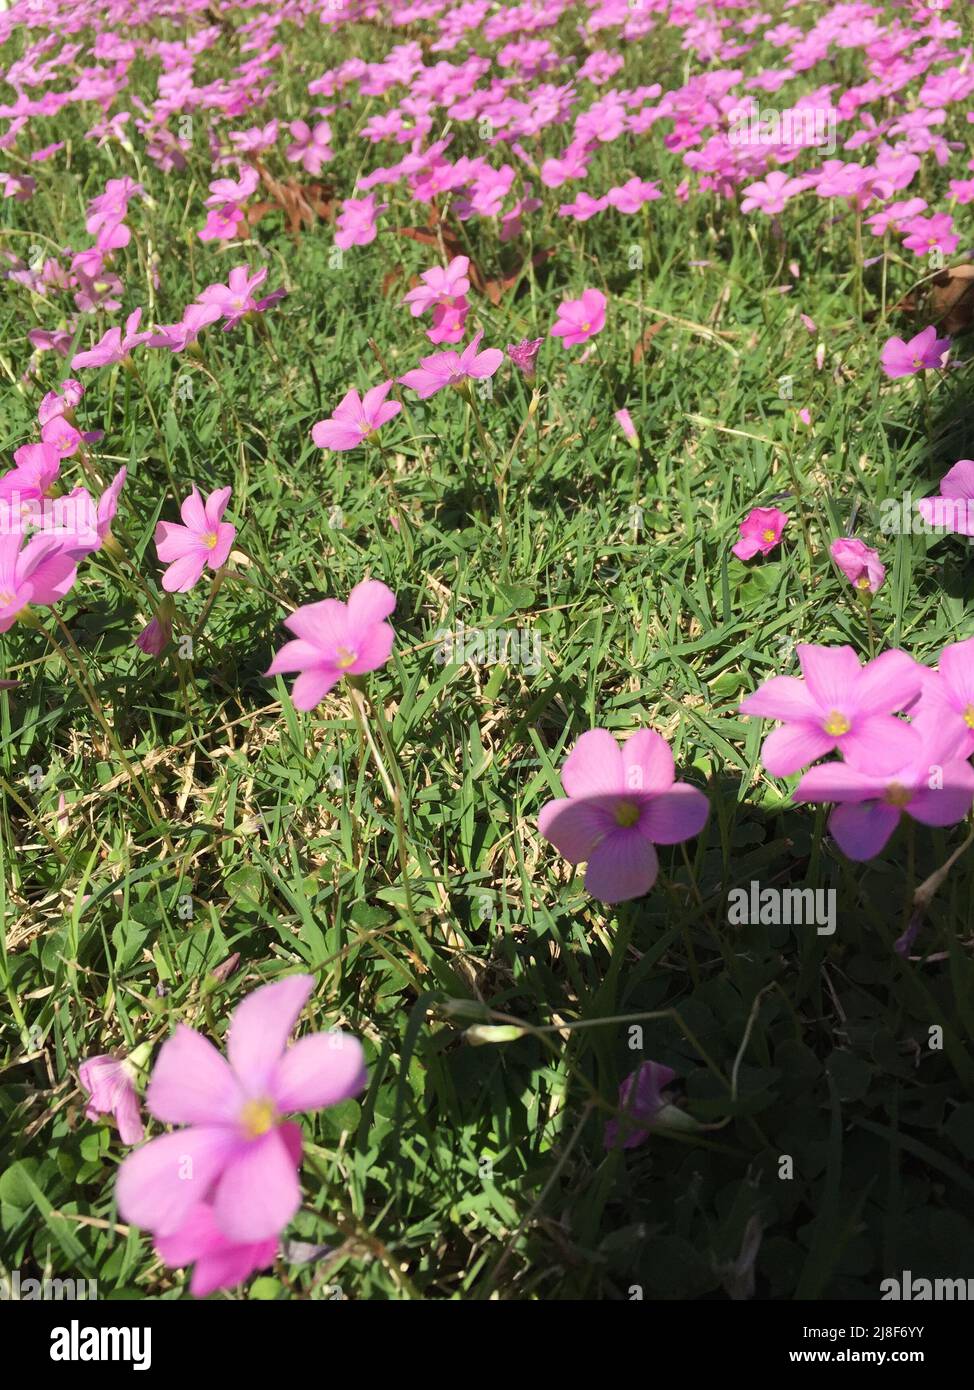 small pink flowers in the grass Stock Photo